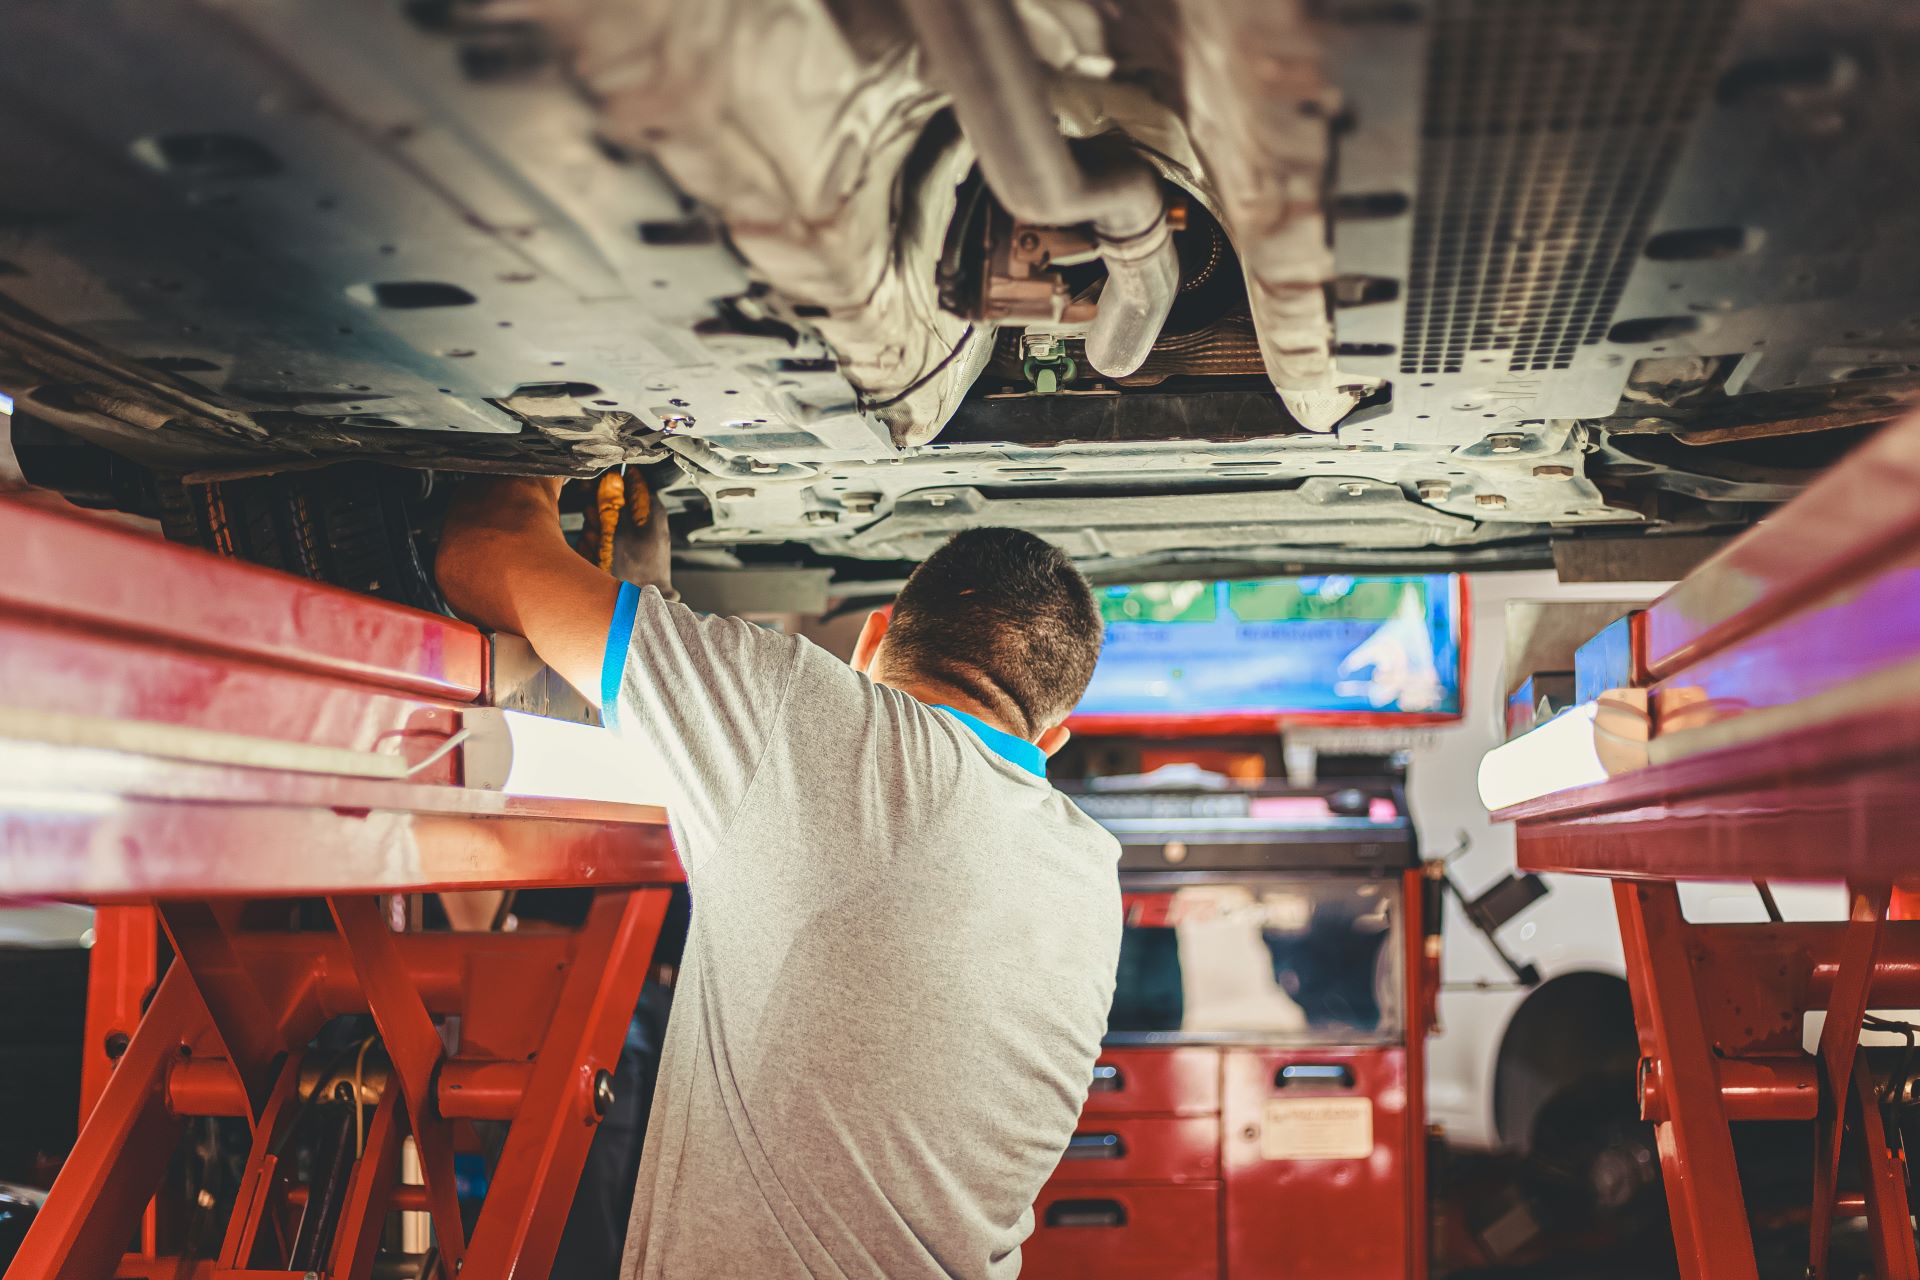 Survey shows 25 per cent of technicians consider leaving in next two years